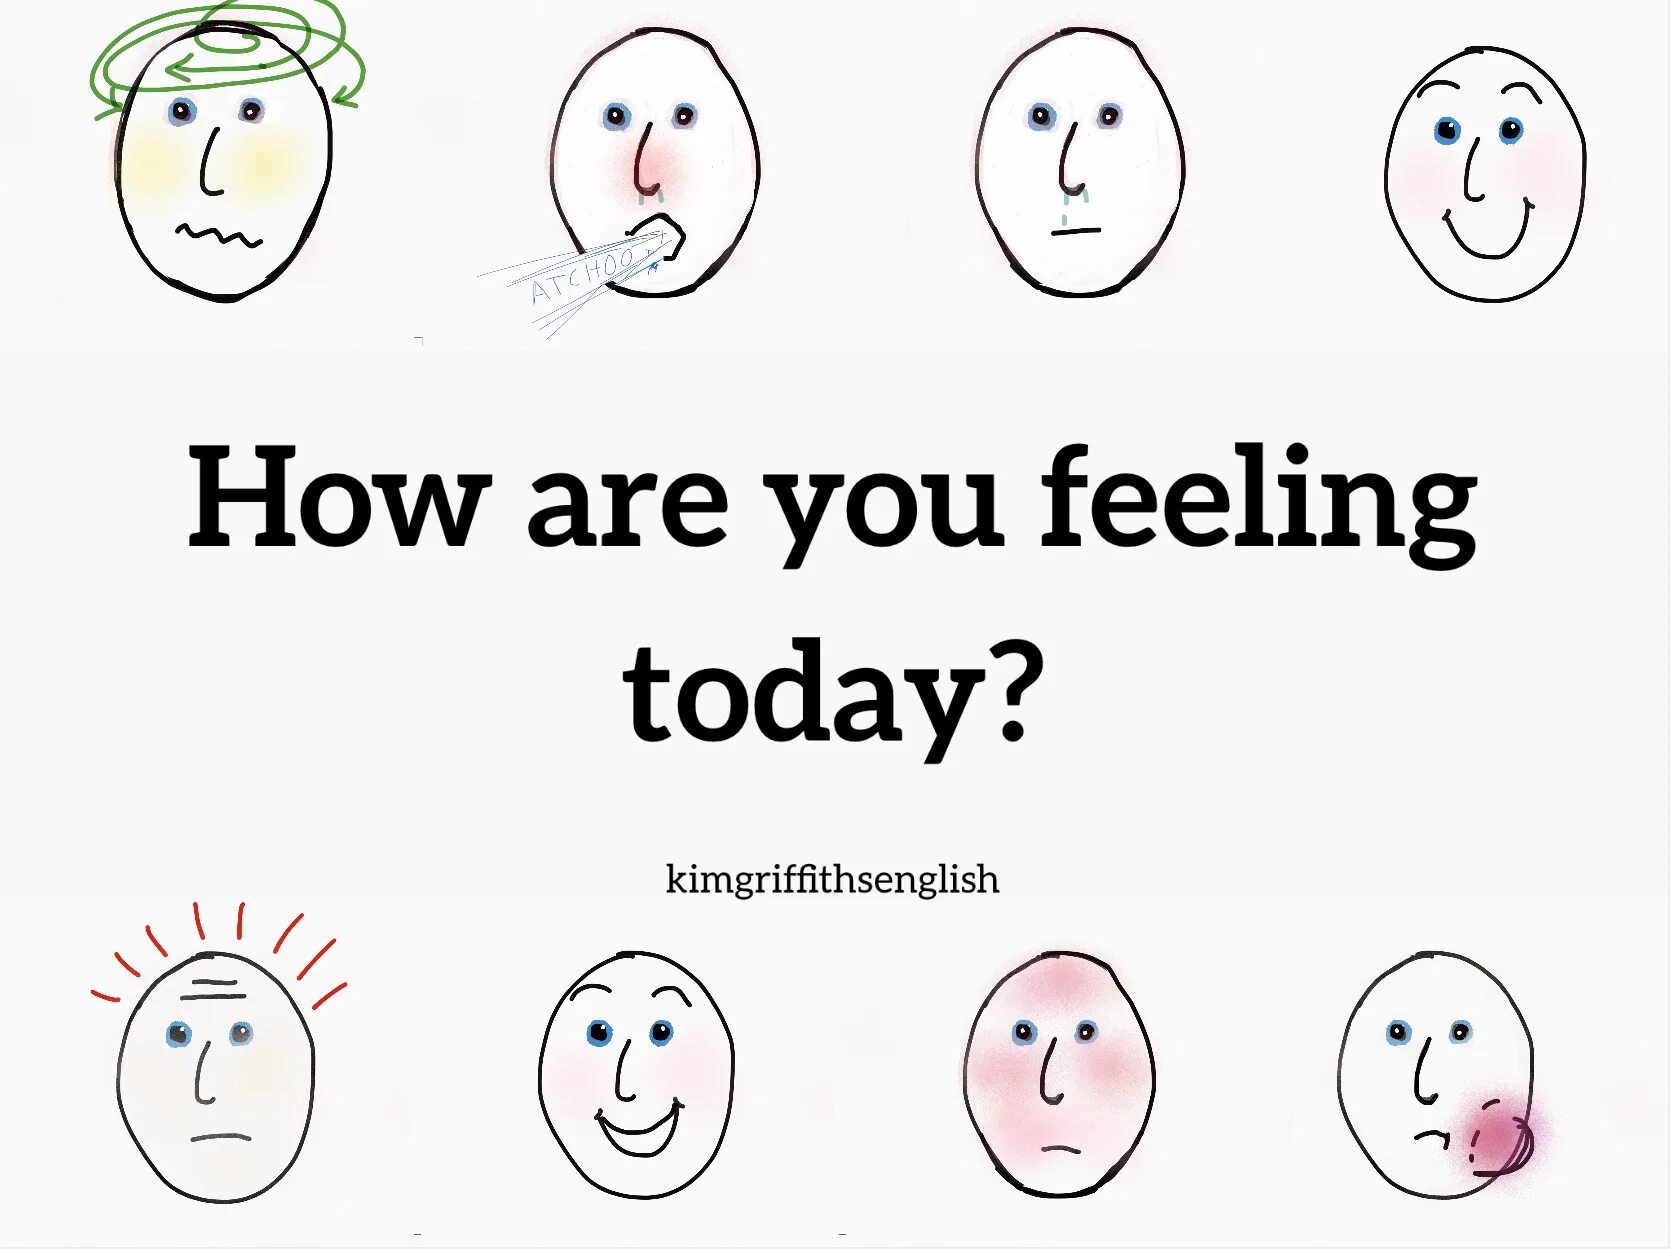 How are you feeling?. How are you feeling today. How are you картинки. How are you feeling today картинки. What do you feel when